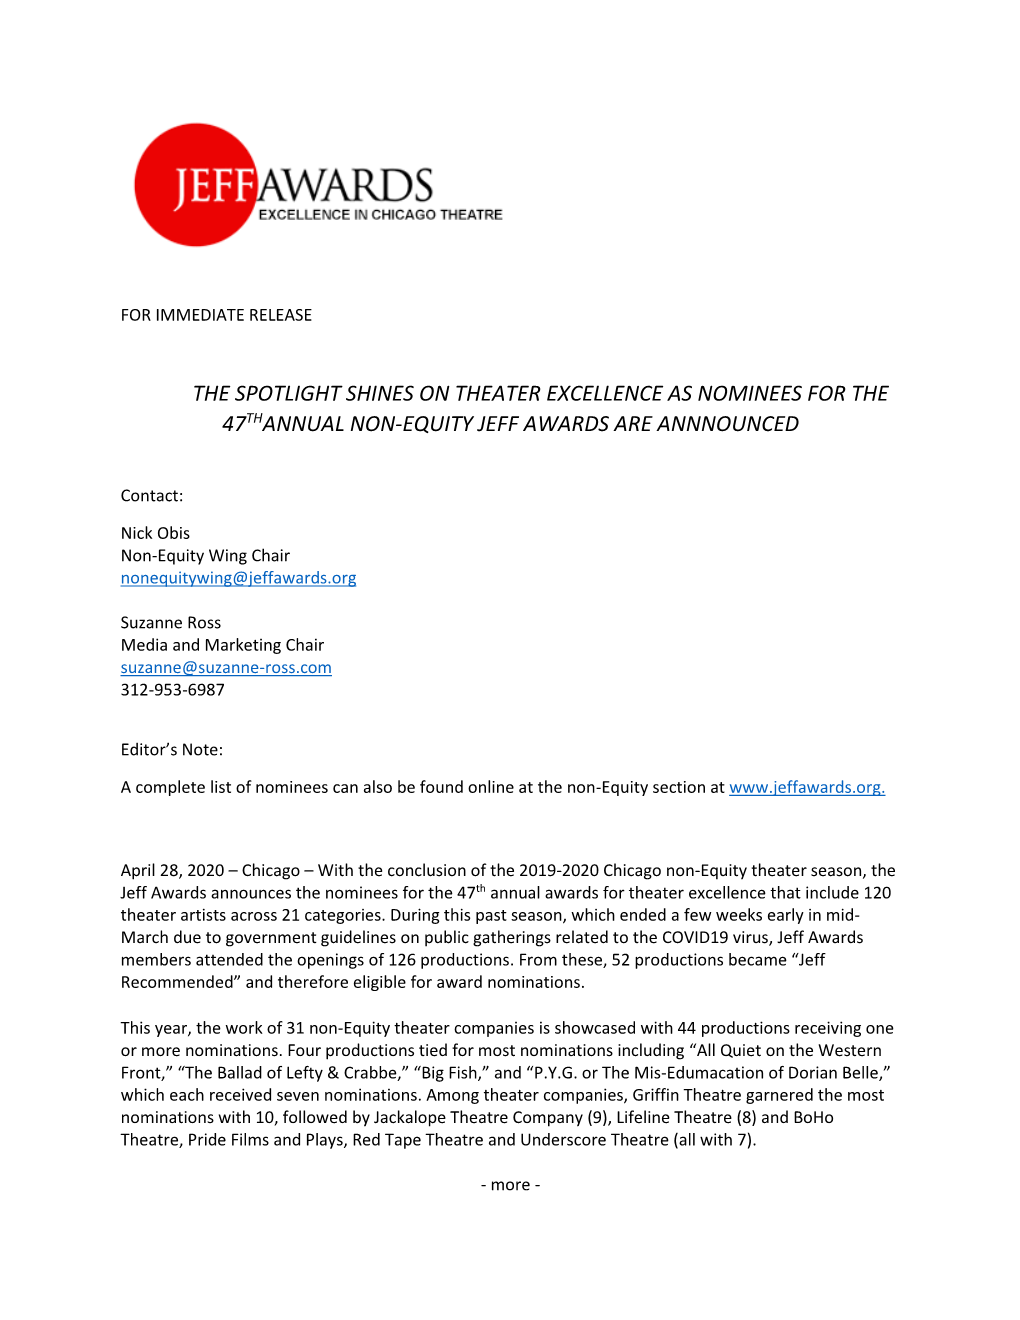 The Spotlight Shines on Theater Excellence As Nominees for the 47Thannual Non-Equity Jeff Awards Are Annnounced